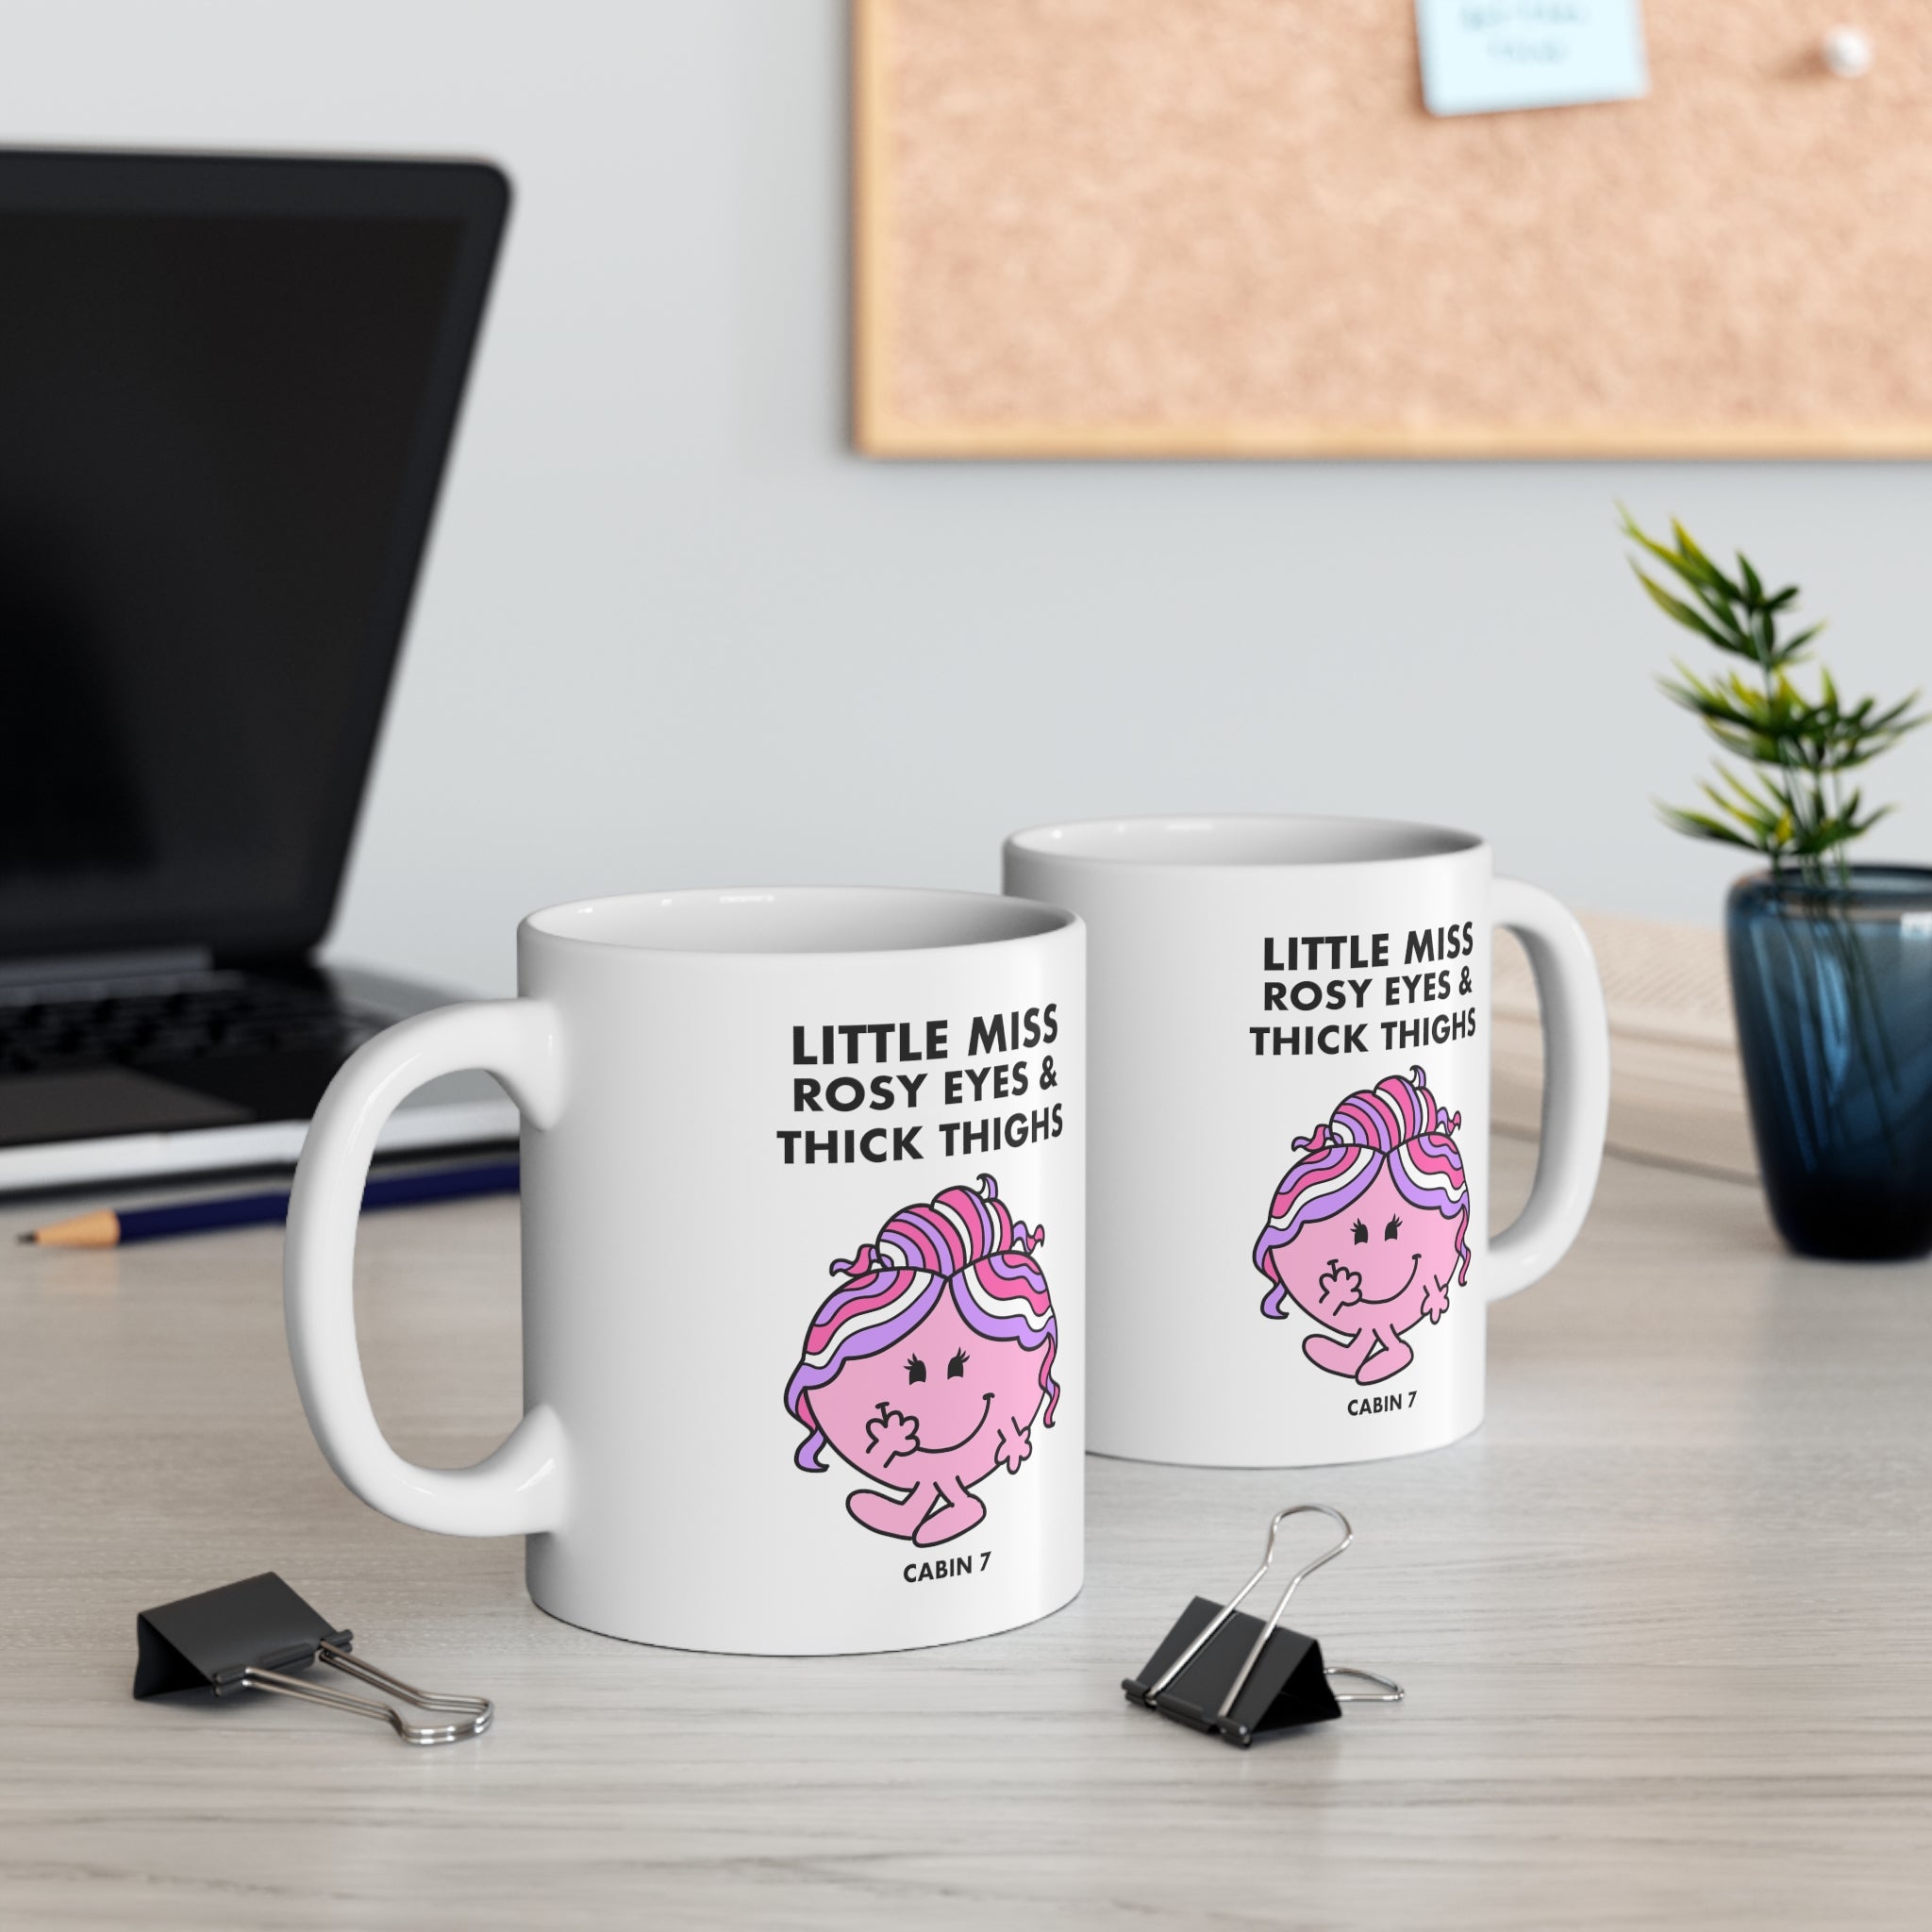 Little Miss Rosy Eyes & Thick Thighs Mug